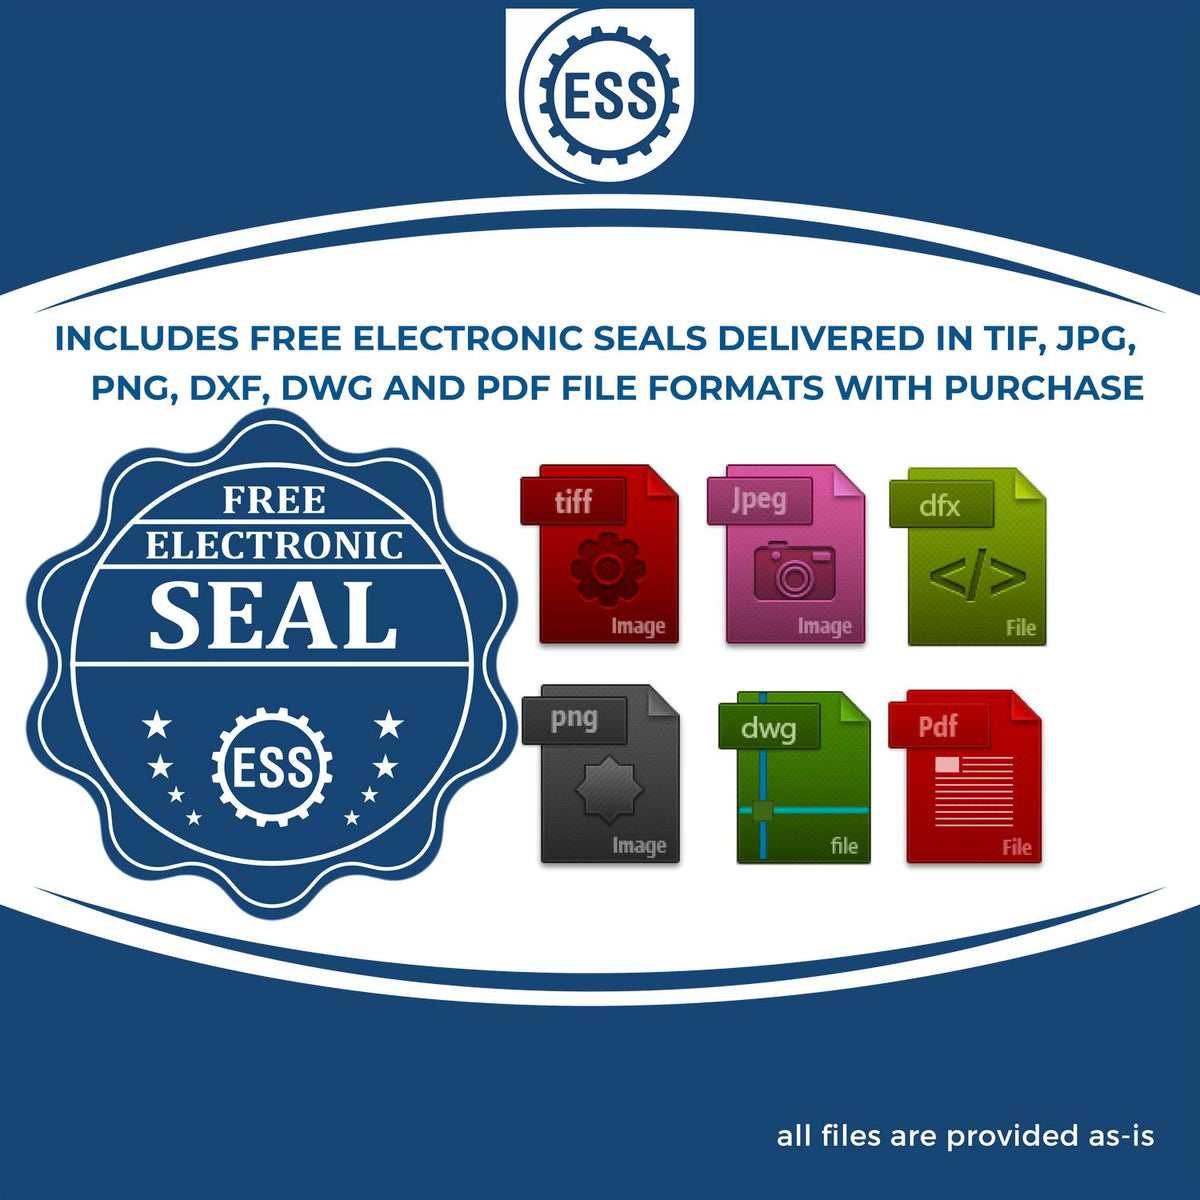 An infographic for the free electronic seal for the Self-Inking Washington Landscape Architect Stamp illustrating the different file type icons such as DXF, DWG, TIF, JPG and PNG.